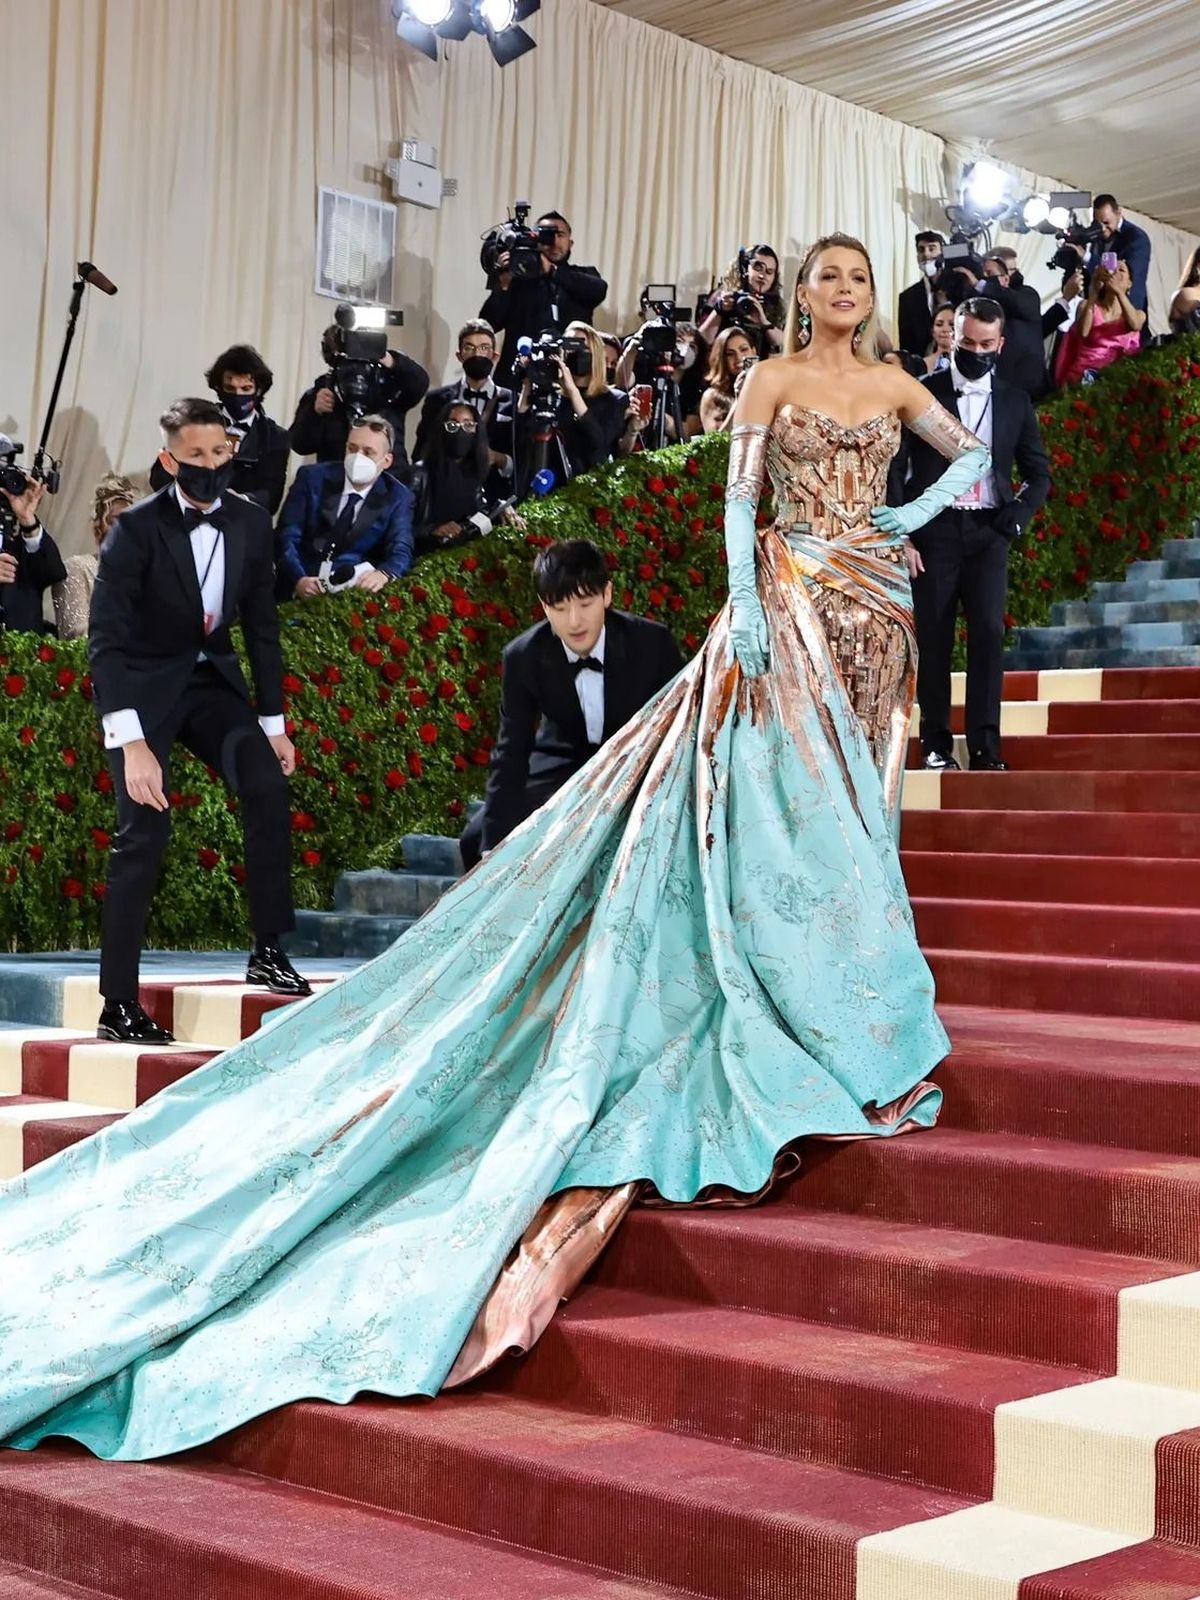 The Vogue Scandinavia team’s best dressed from the 2022 Met Gala ...